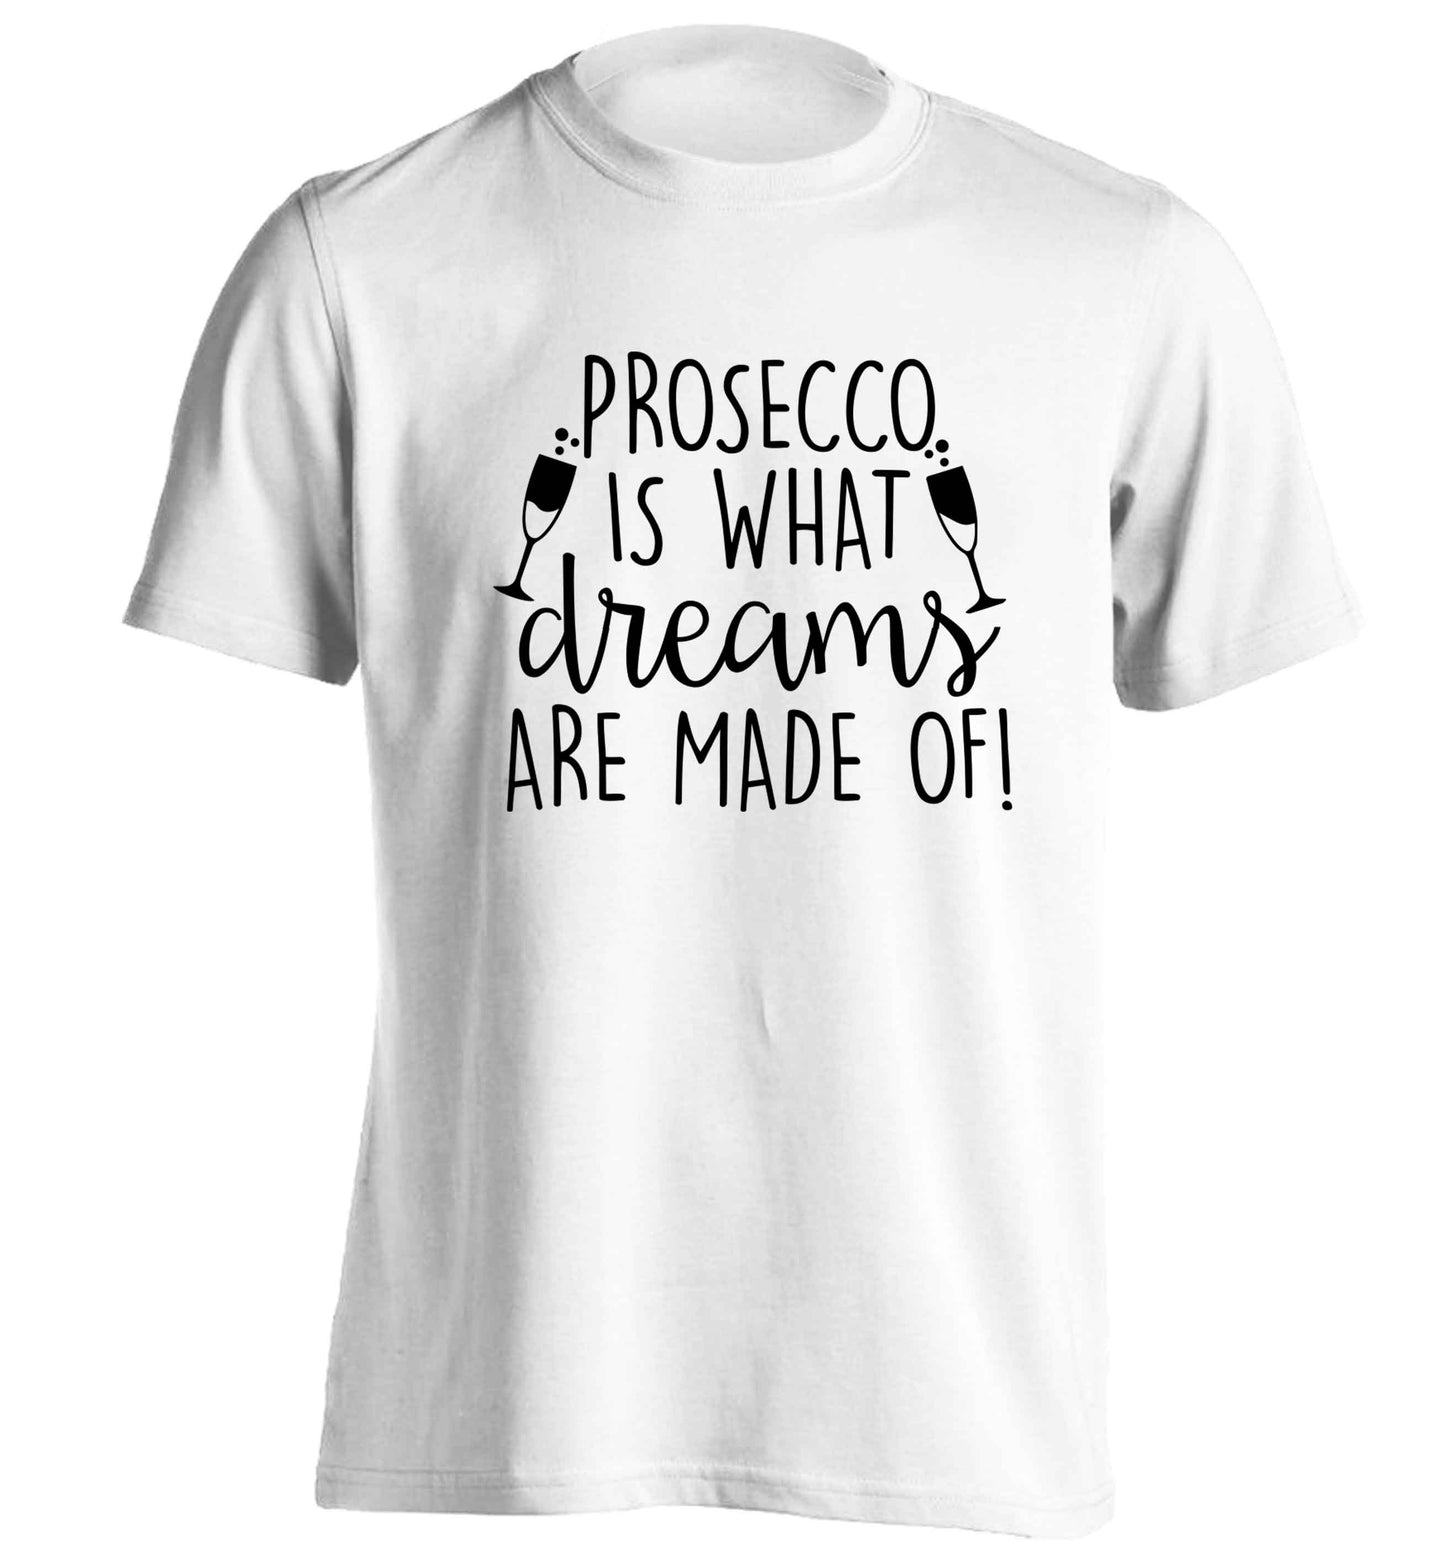 Prosecco is what dreams are made of adults unisex white Tshirt 2XL